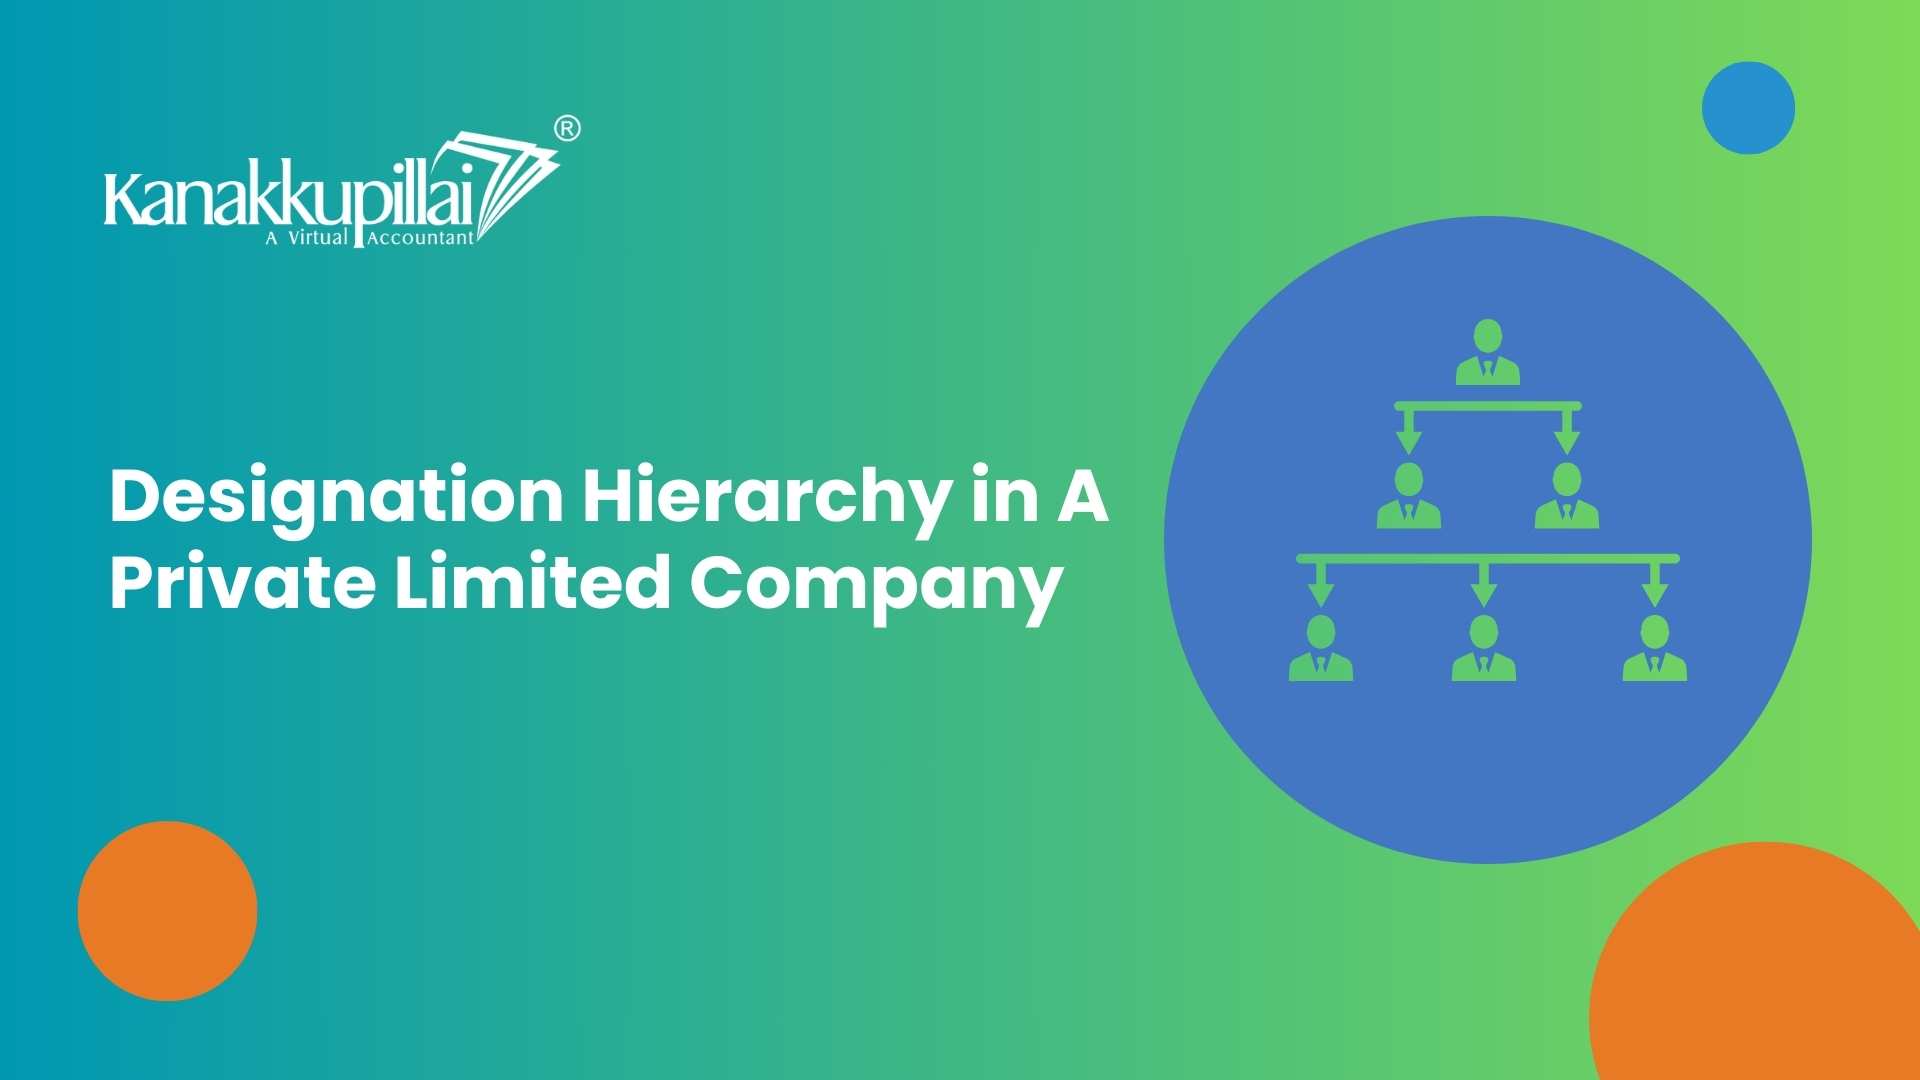 You are currently viewing Designation Hierarchy in A Private Limited Company